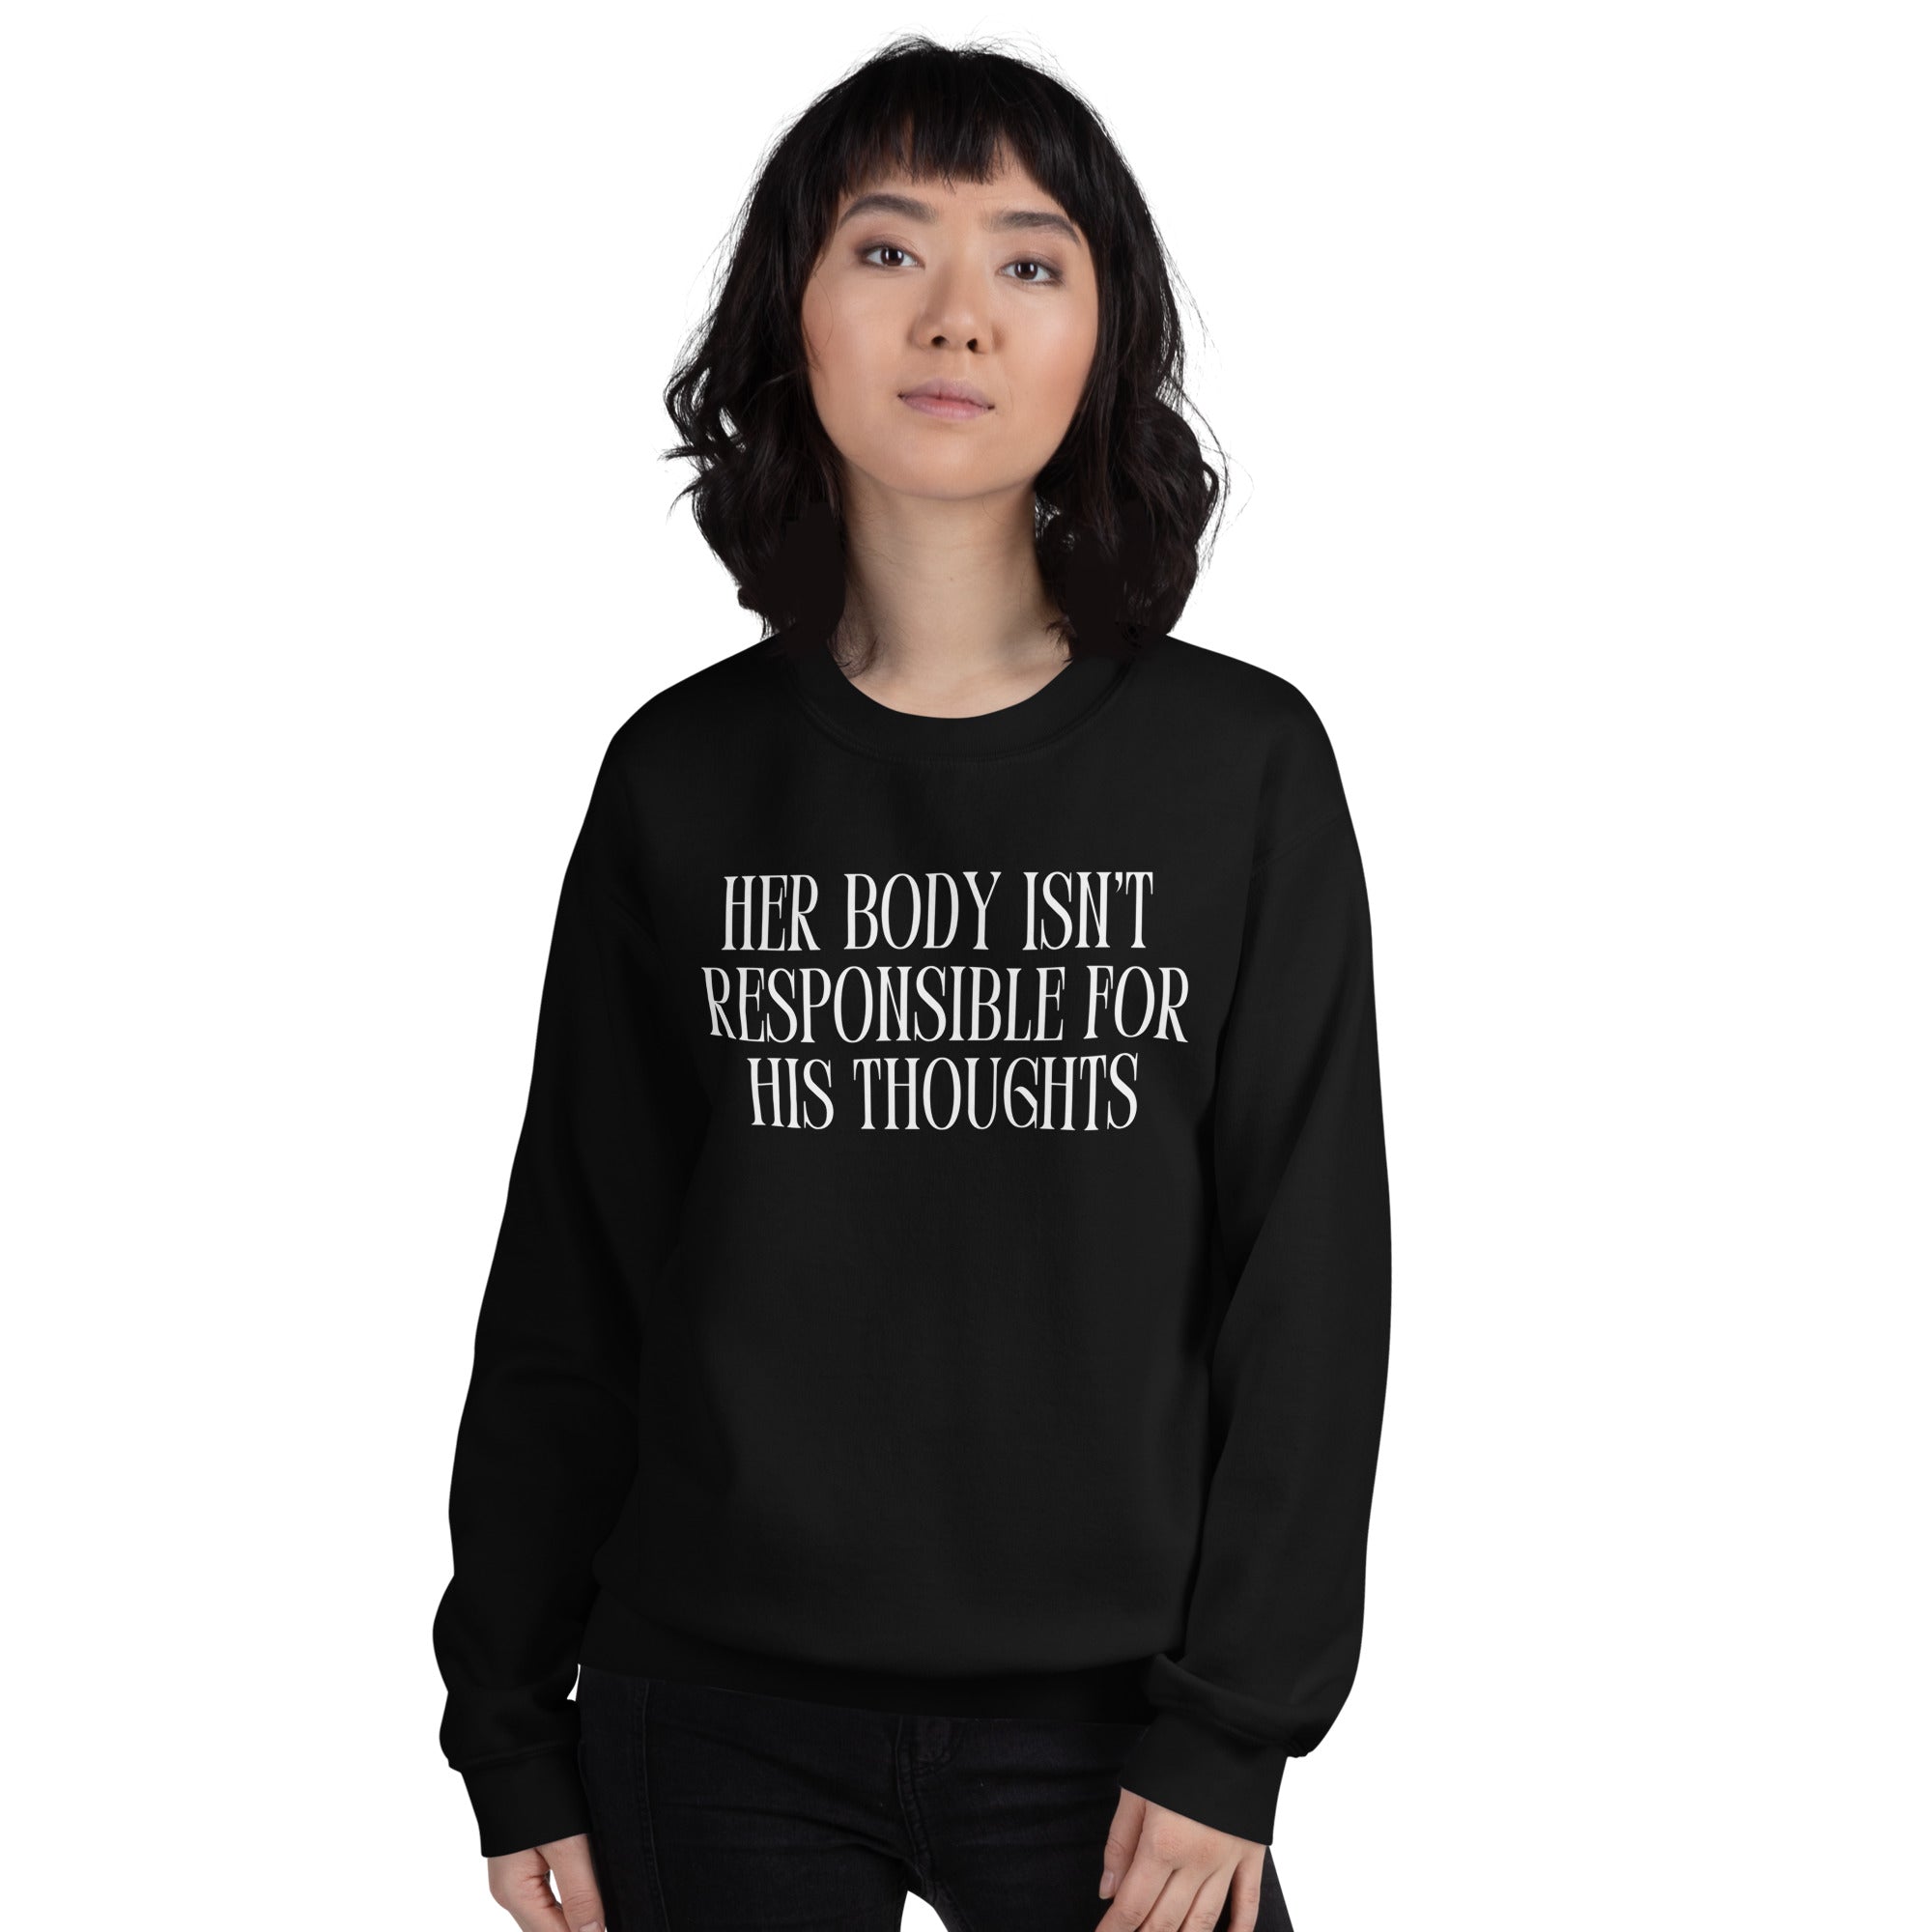 Her Body Isn’t Responsible For His Thoughts Unisex Sweatshirt